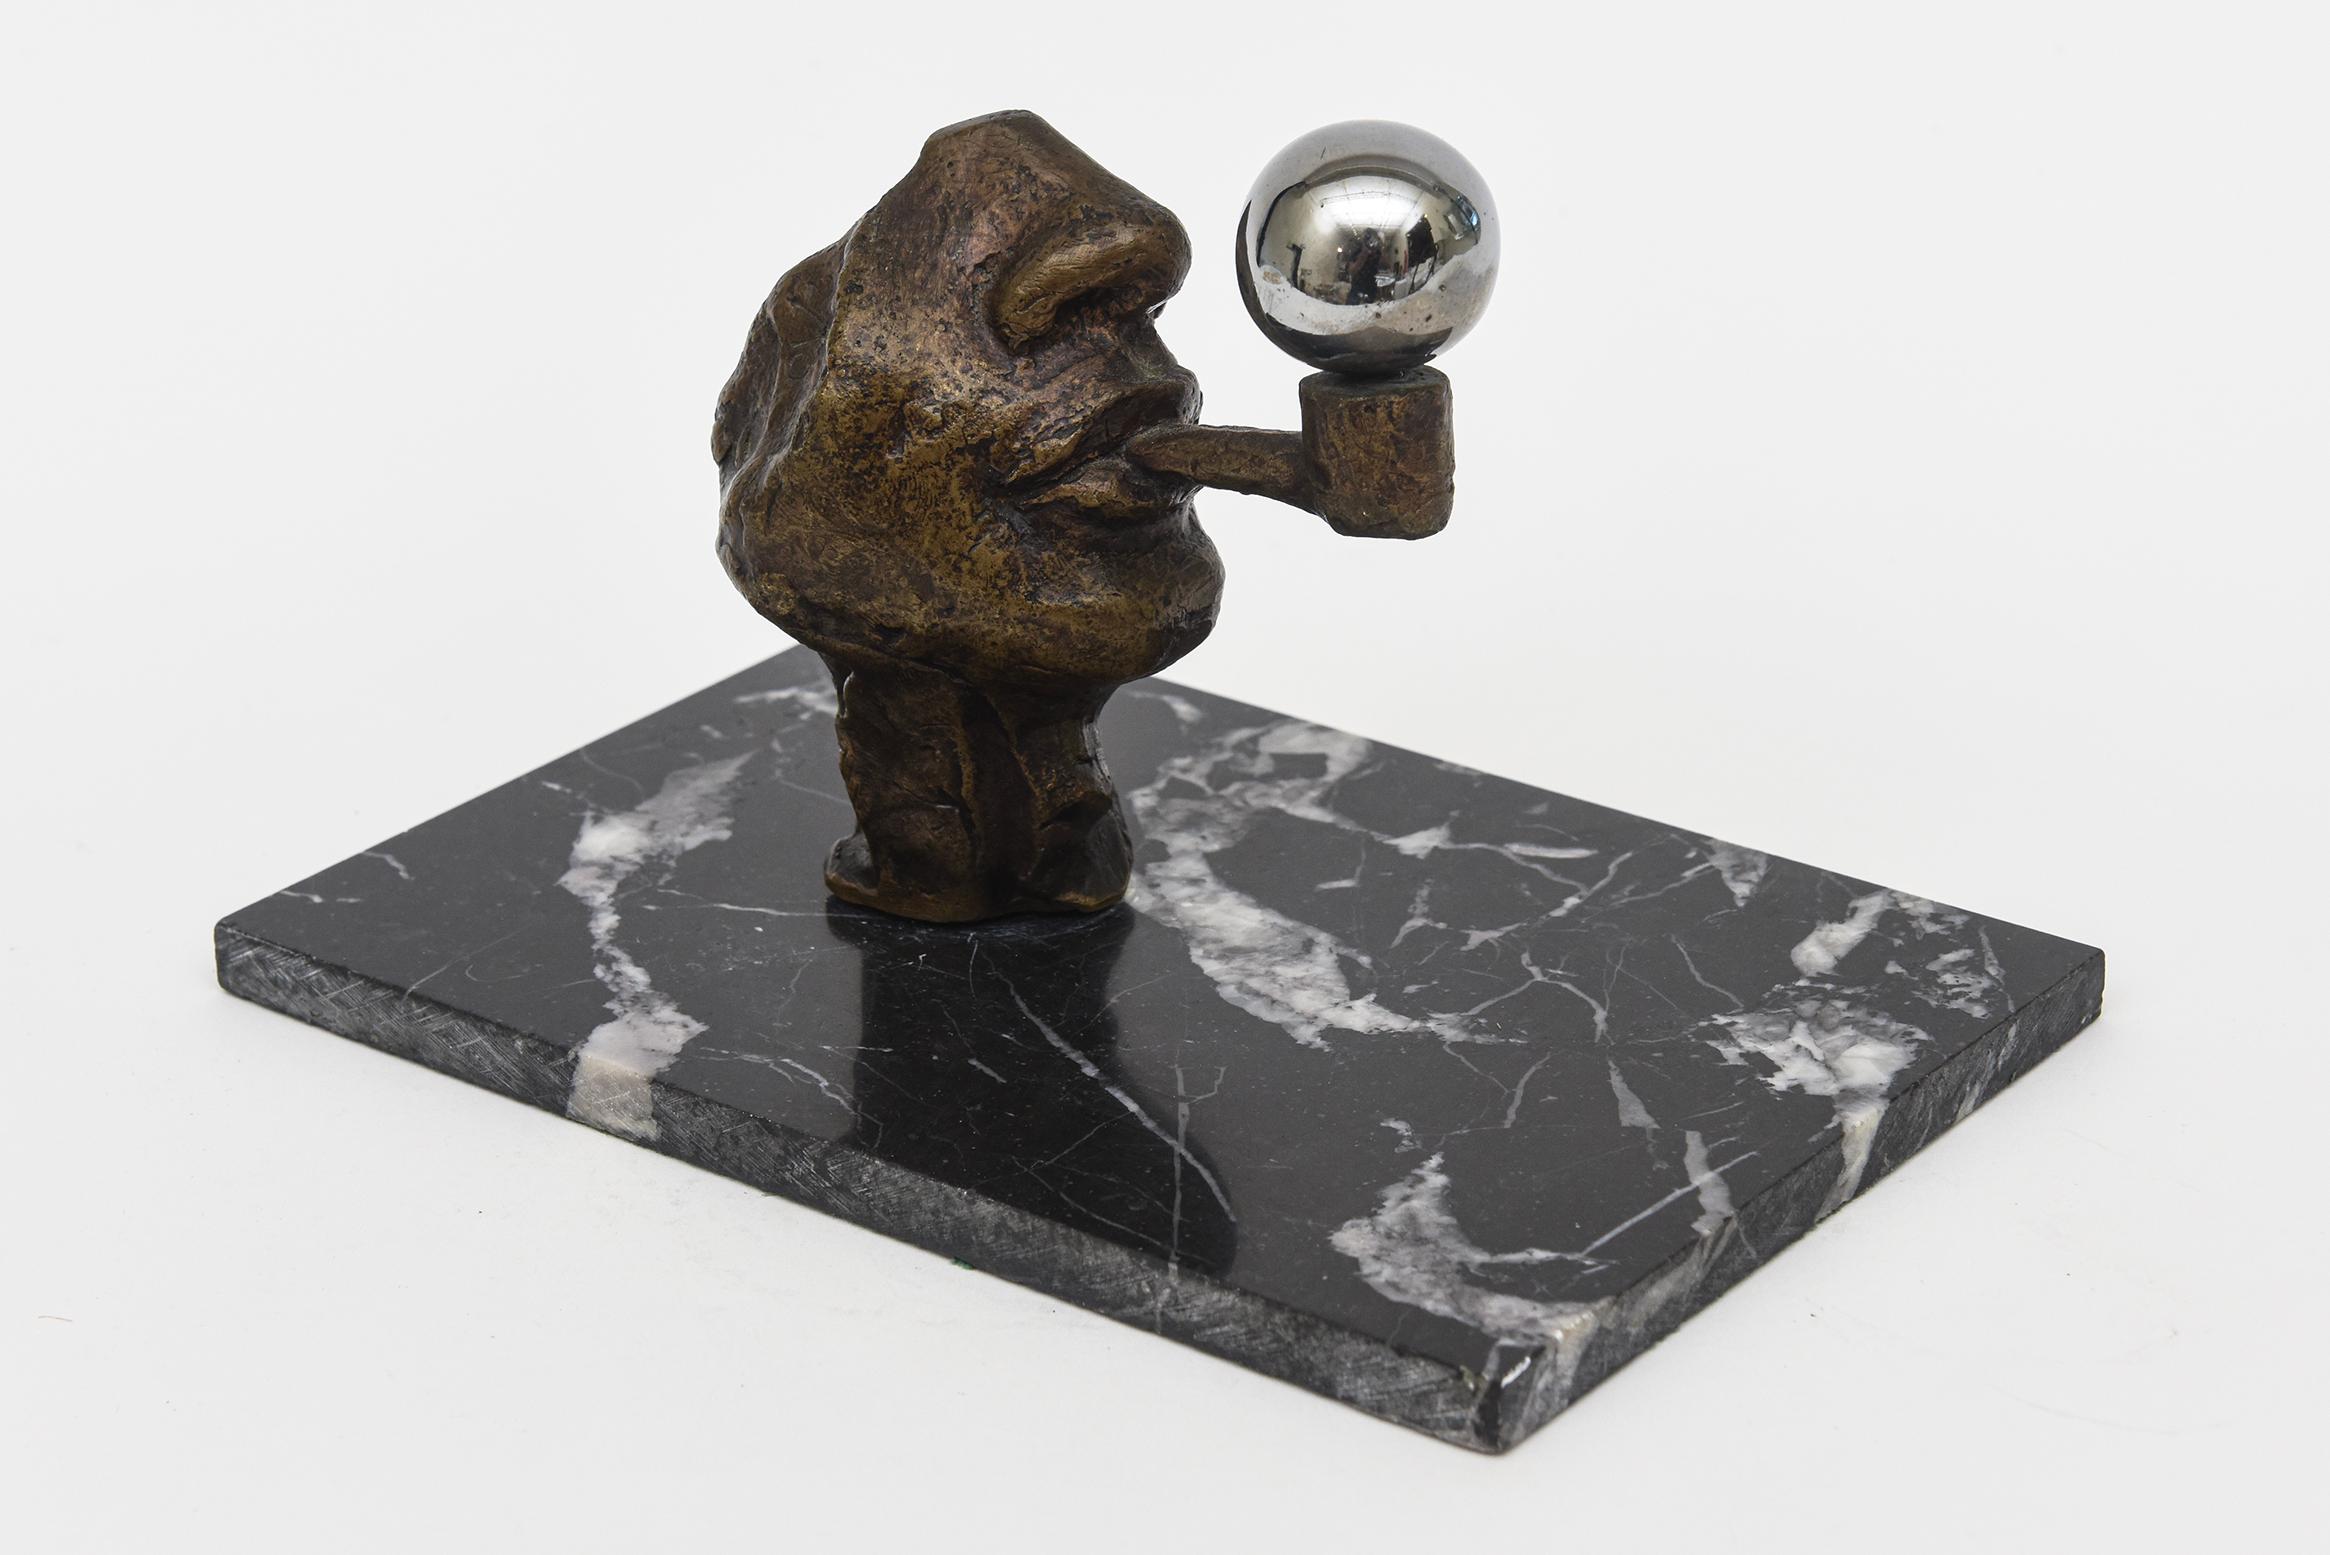 This delightful vintage sculpture by Victor Salmones is from the 80's. It sits on a black and white vintage variegated original marble base and the sculpture head is bronze while the bubble is chrome. The sculptors life span was from 1937-1989. The